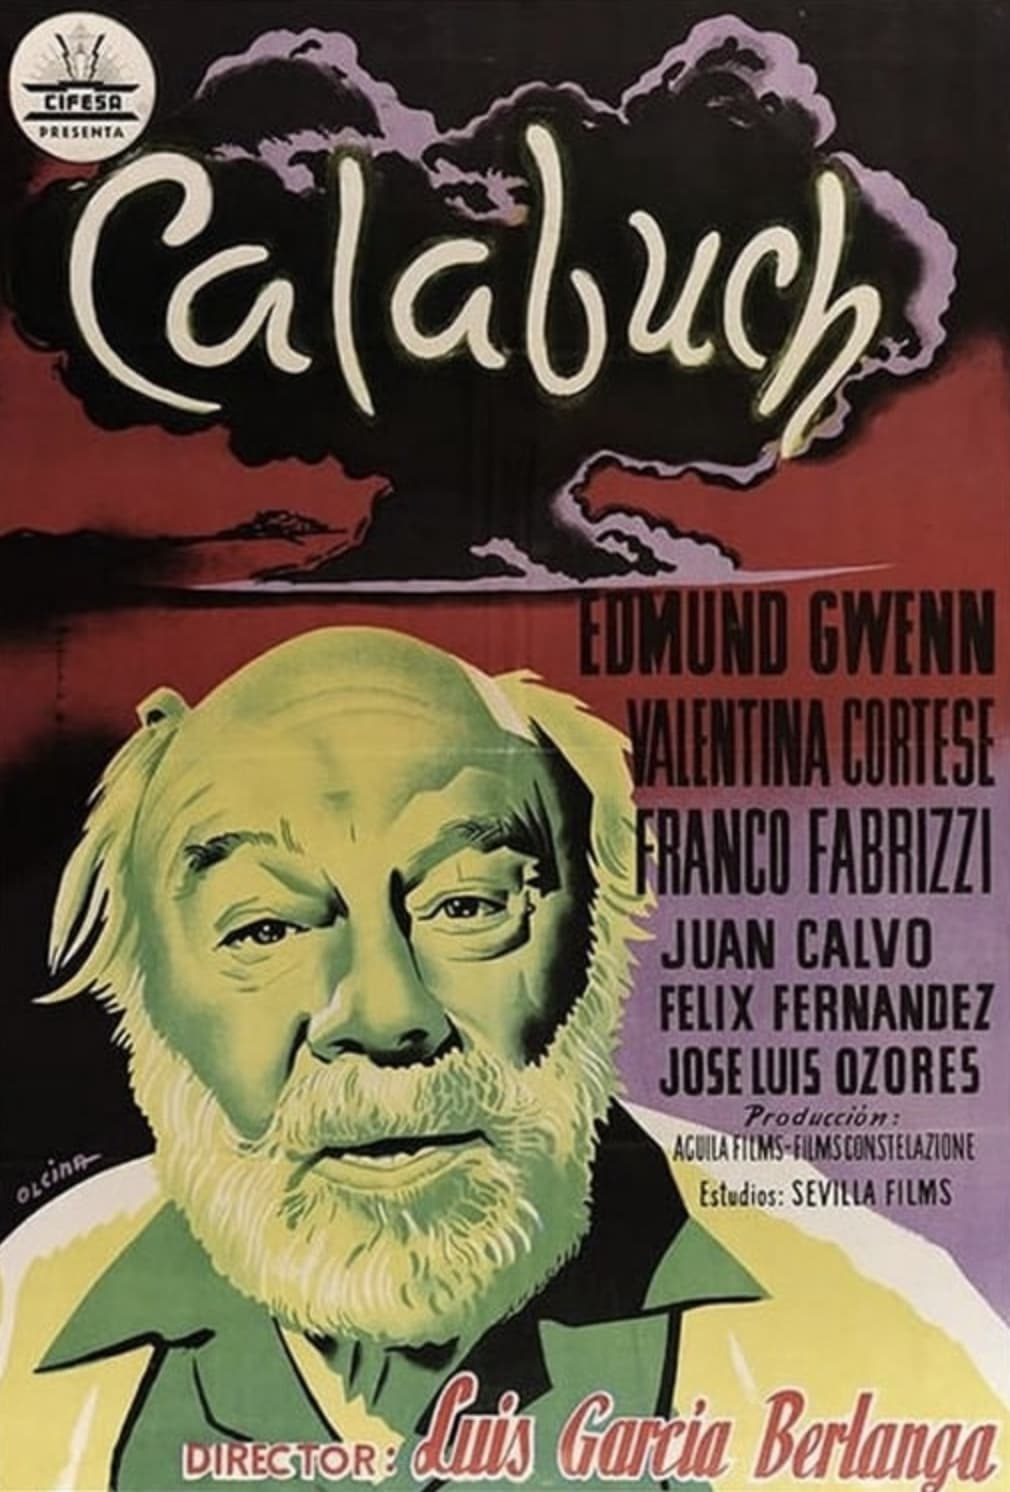 The Rocket from Calabuch (1956)